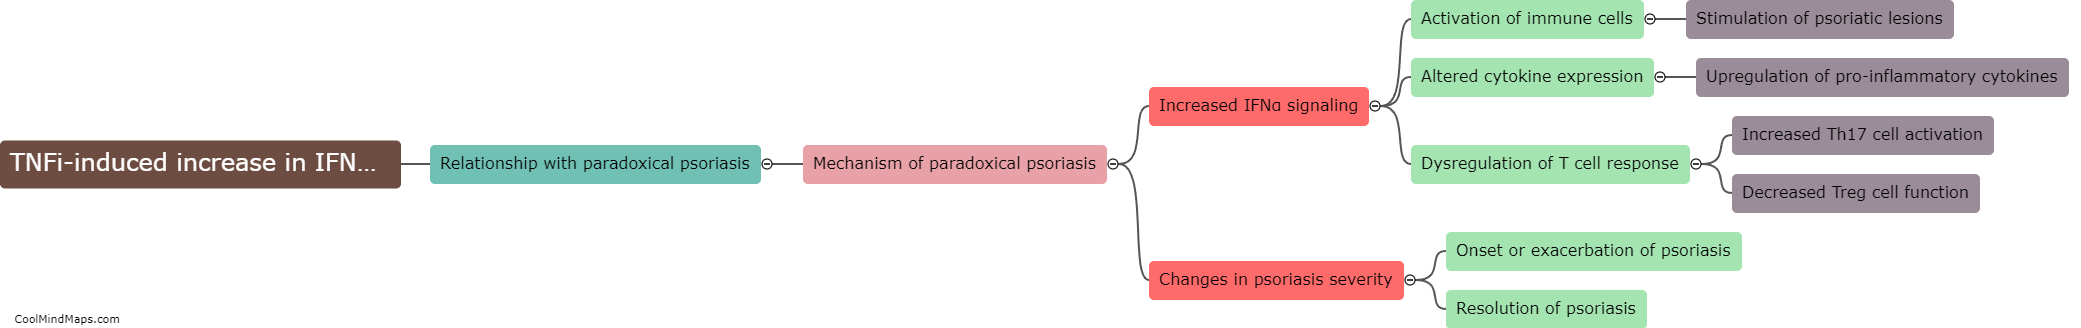 What is the relationship between TNFi-induced increase in IFNα response and paradoxical psoriasis?